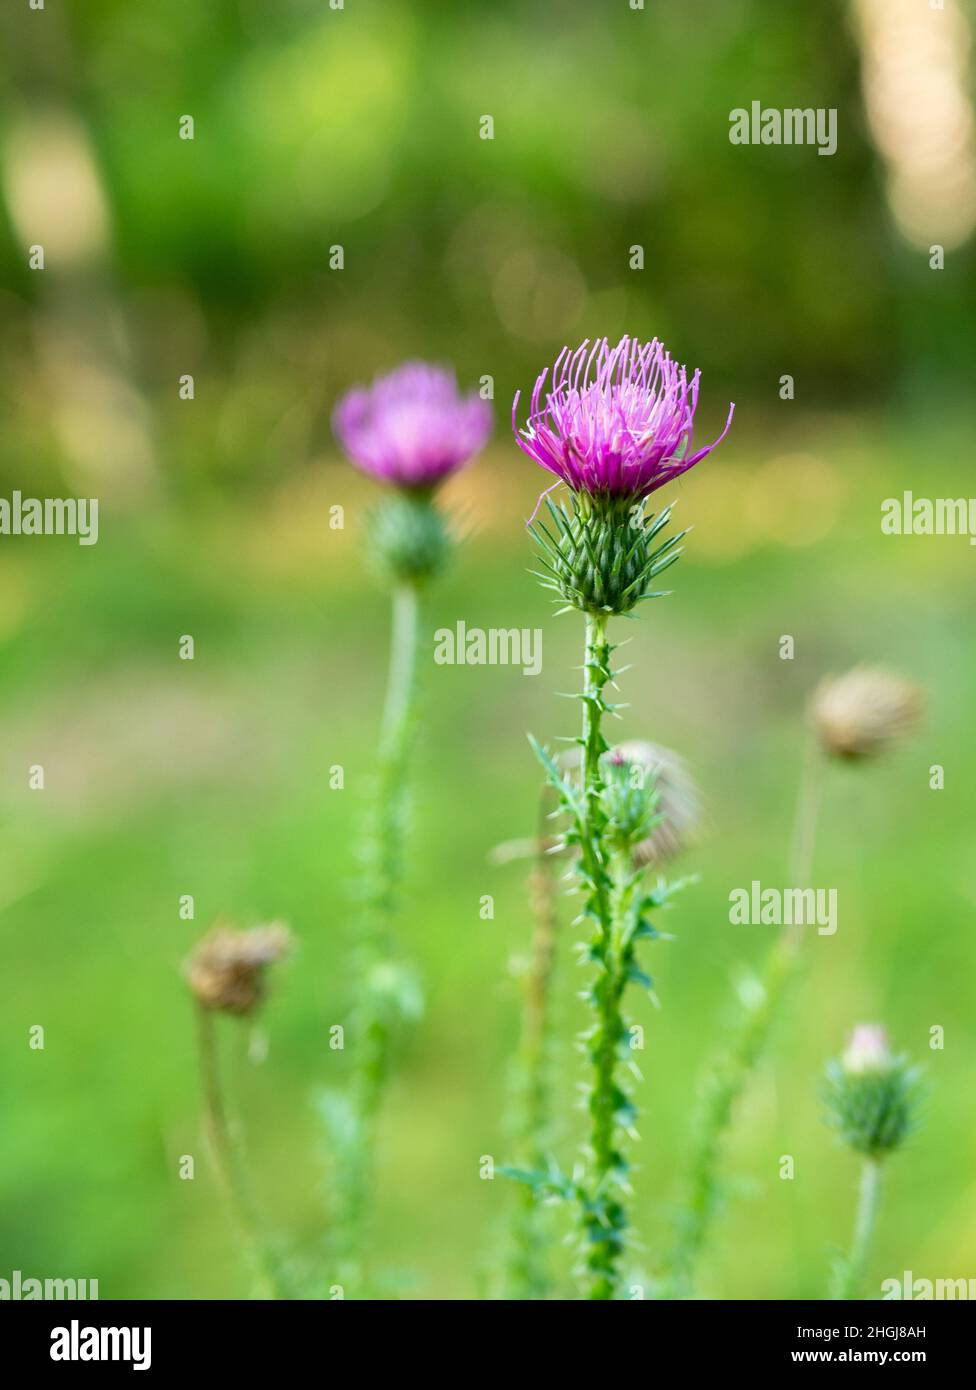 Asteraceae Cirsium arvense or Canada thistle, closeup of young blossom with blurred background. AKA creeping thistle and lettuce from hell. Stock Photo